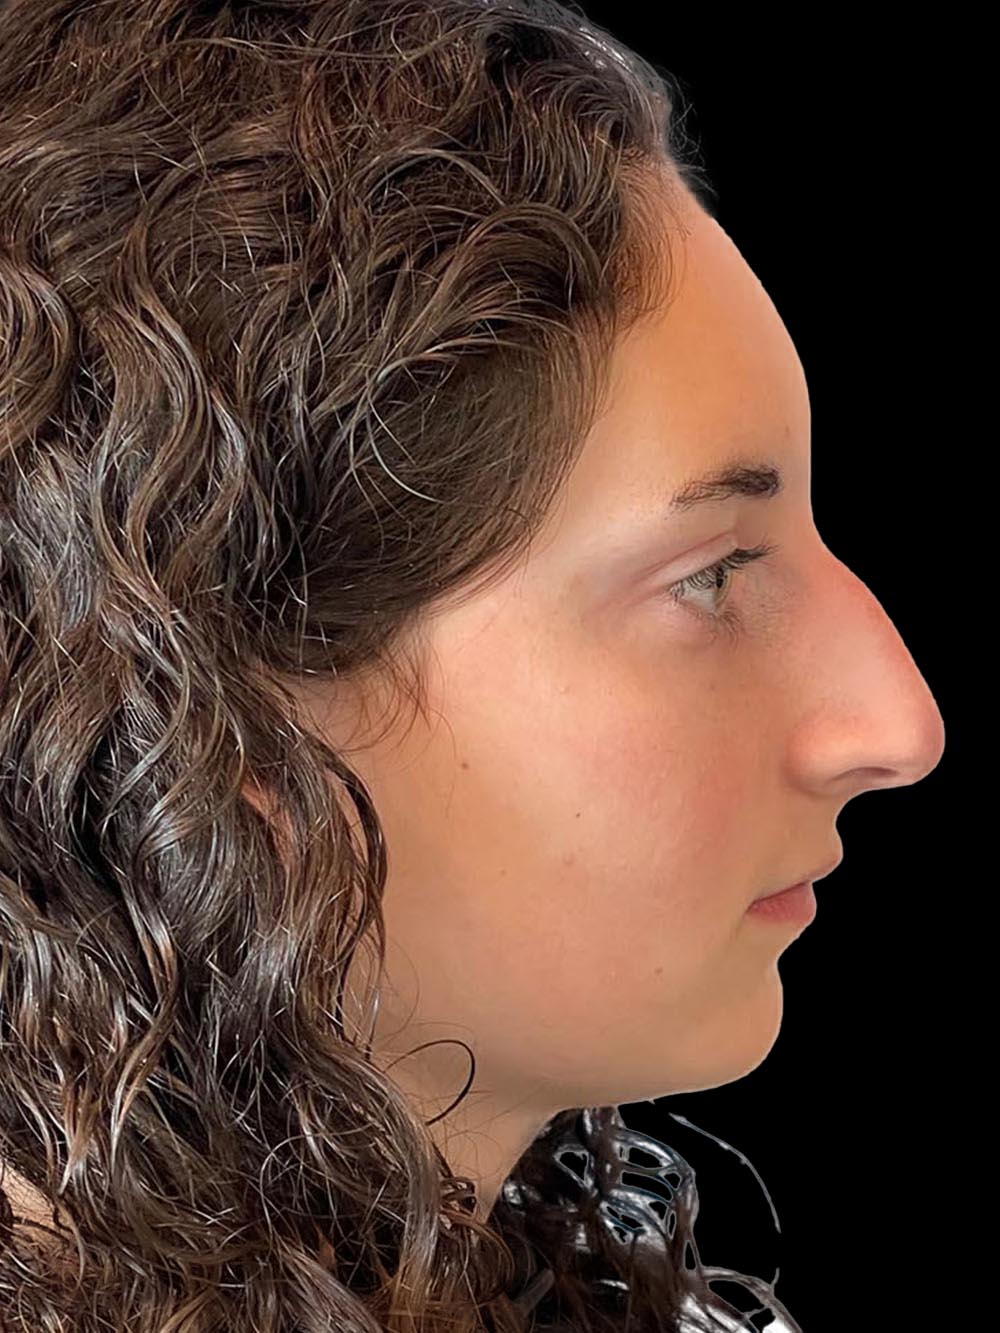 Photo of the patient’s face before the Rhinoplasty surgery. Patient 7 - Set 5